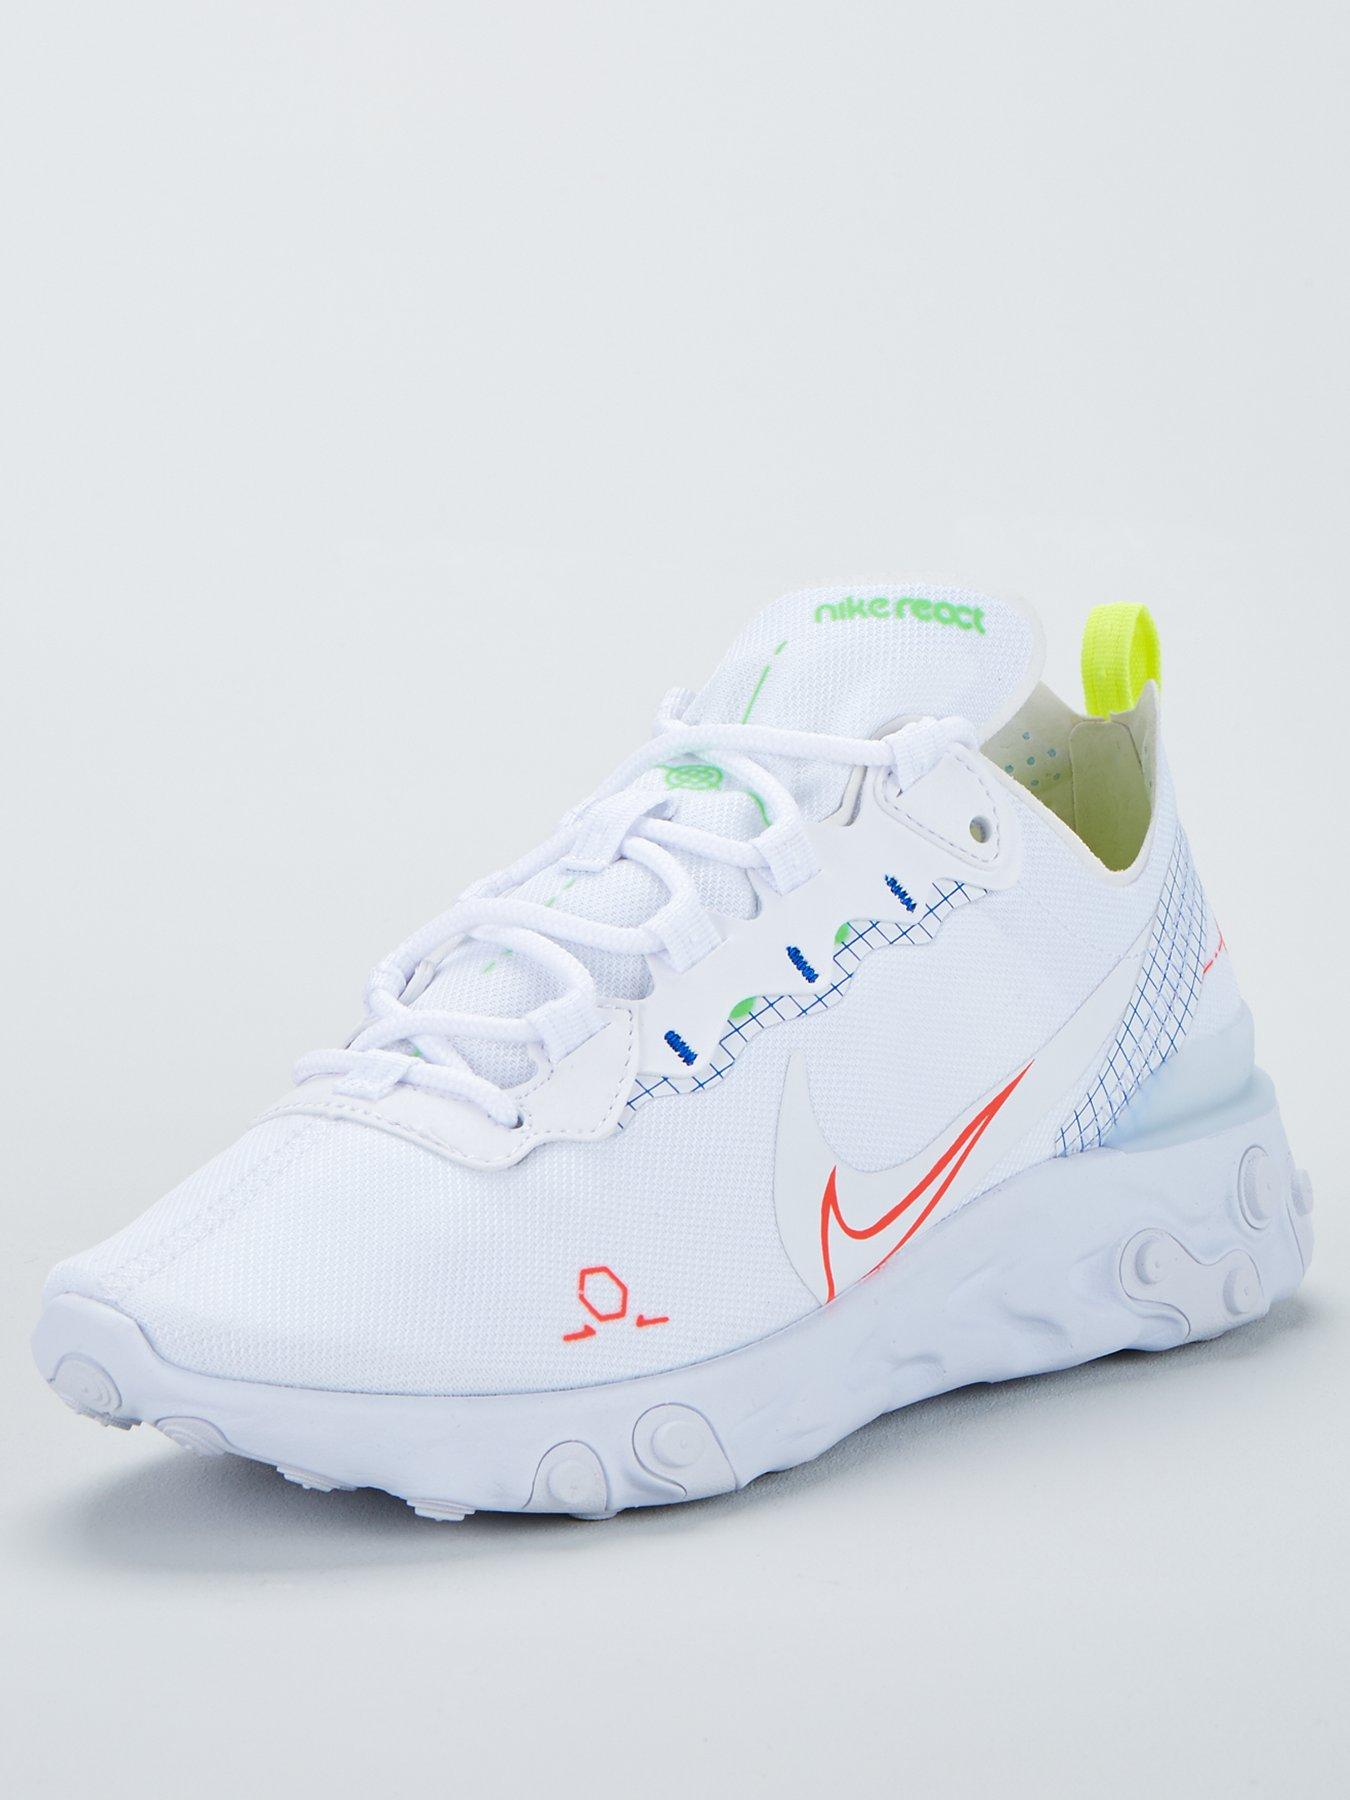 nike trainers littlewoods